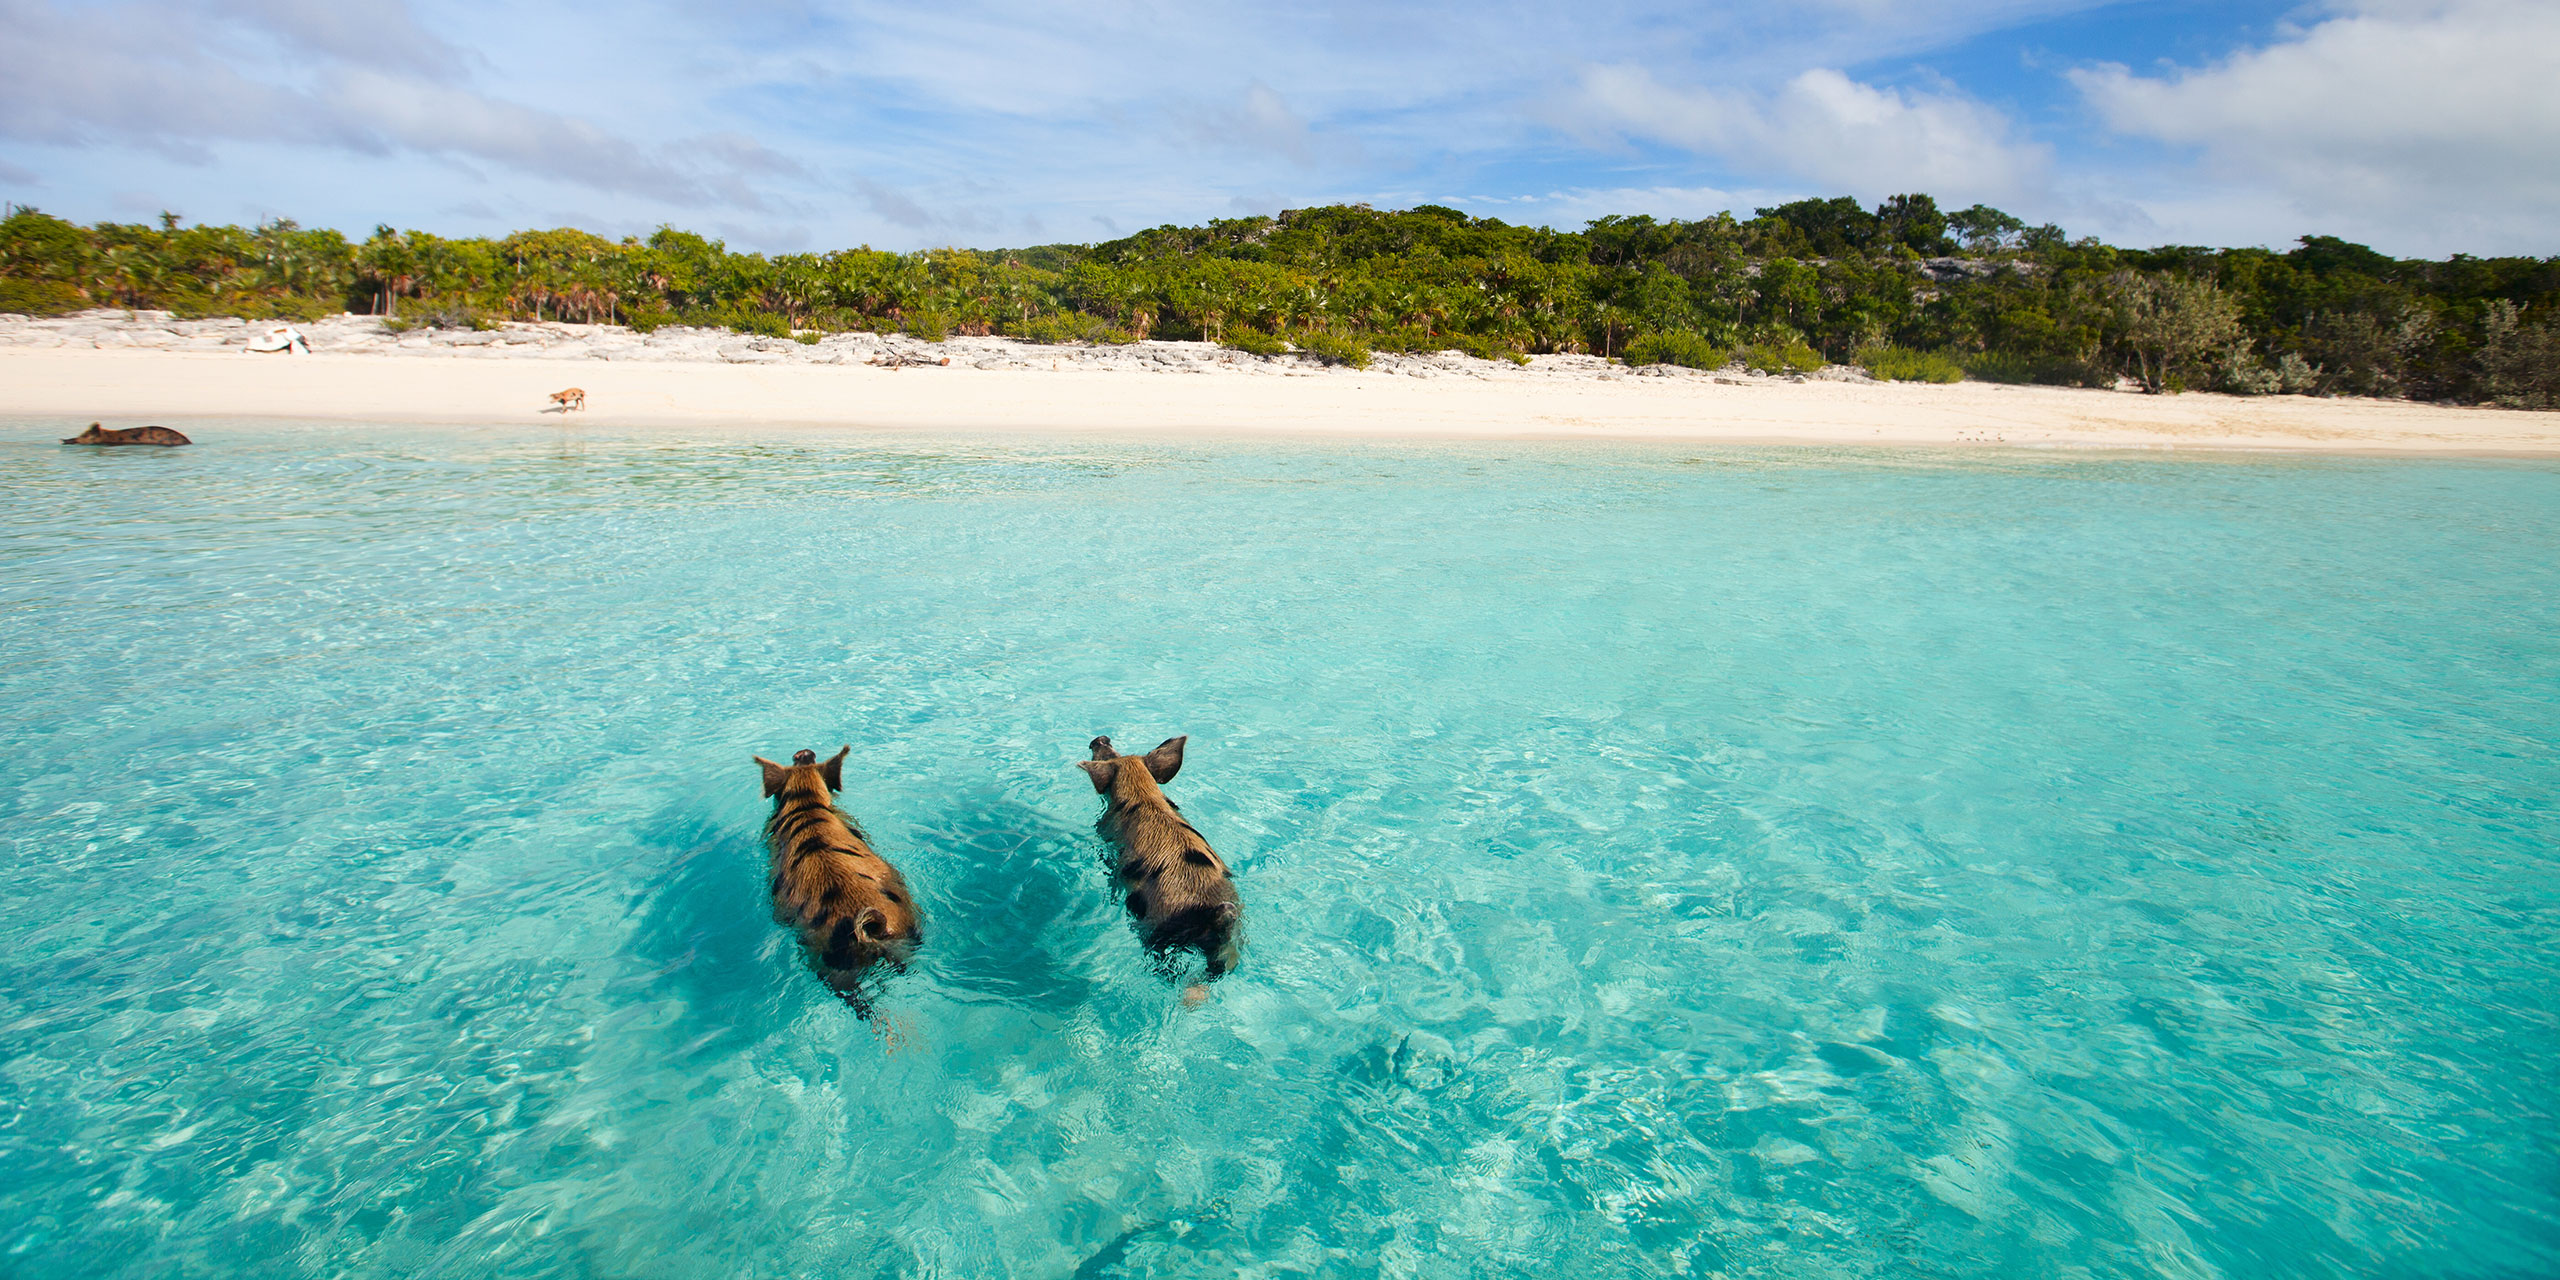 Wild Pigs in the Bahamas